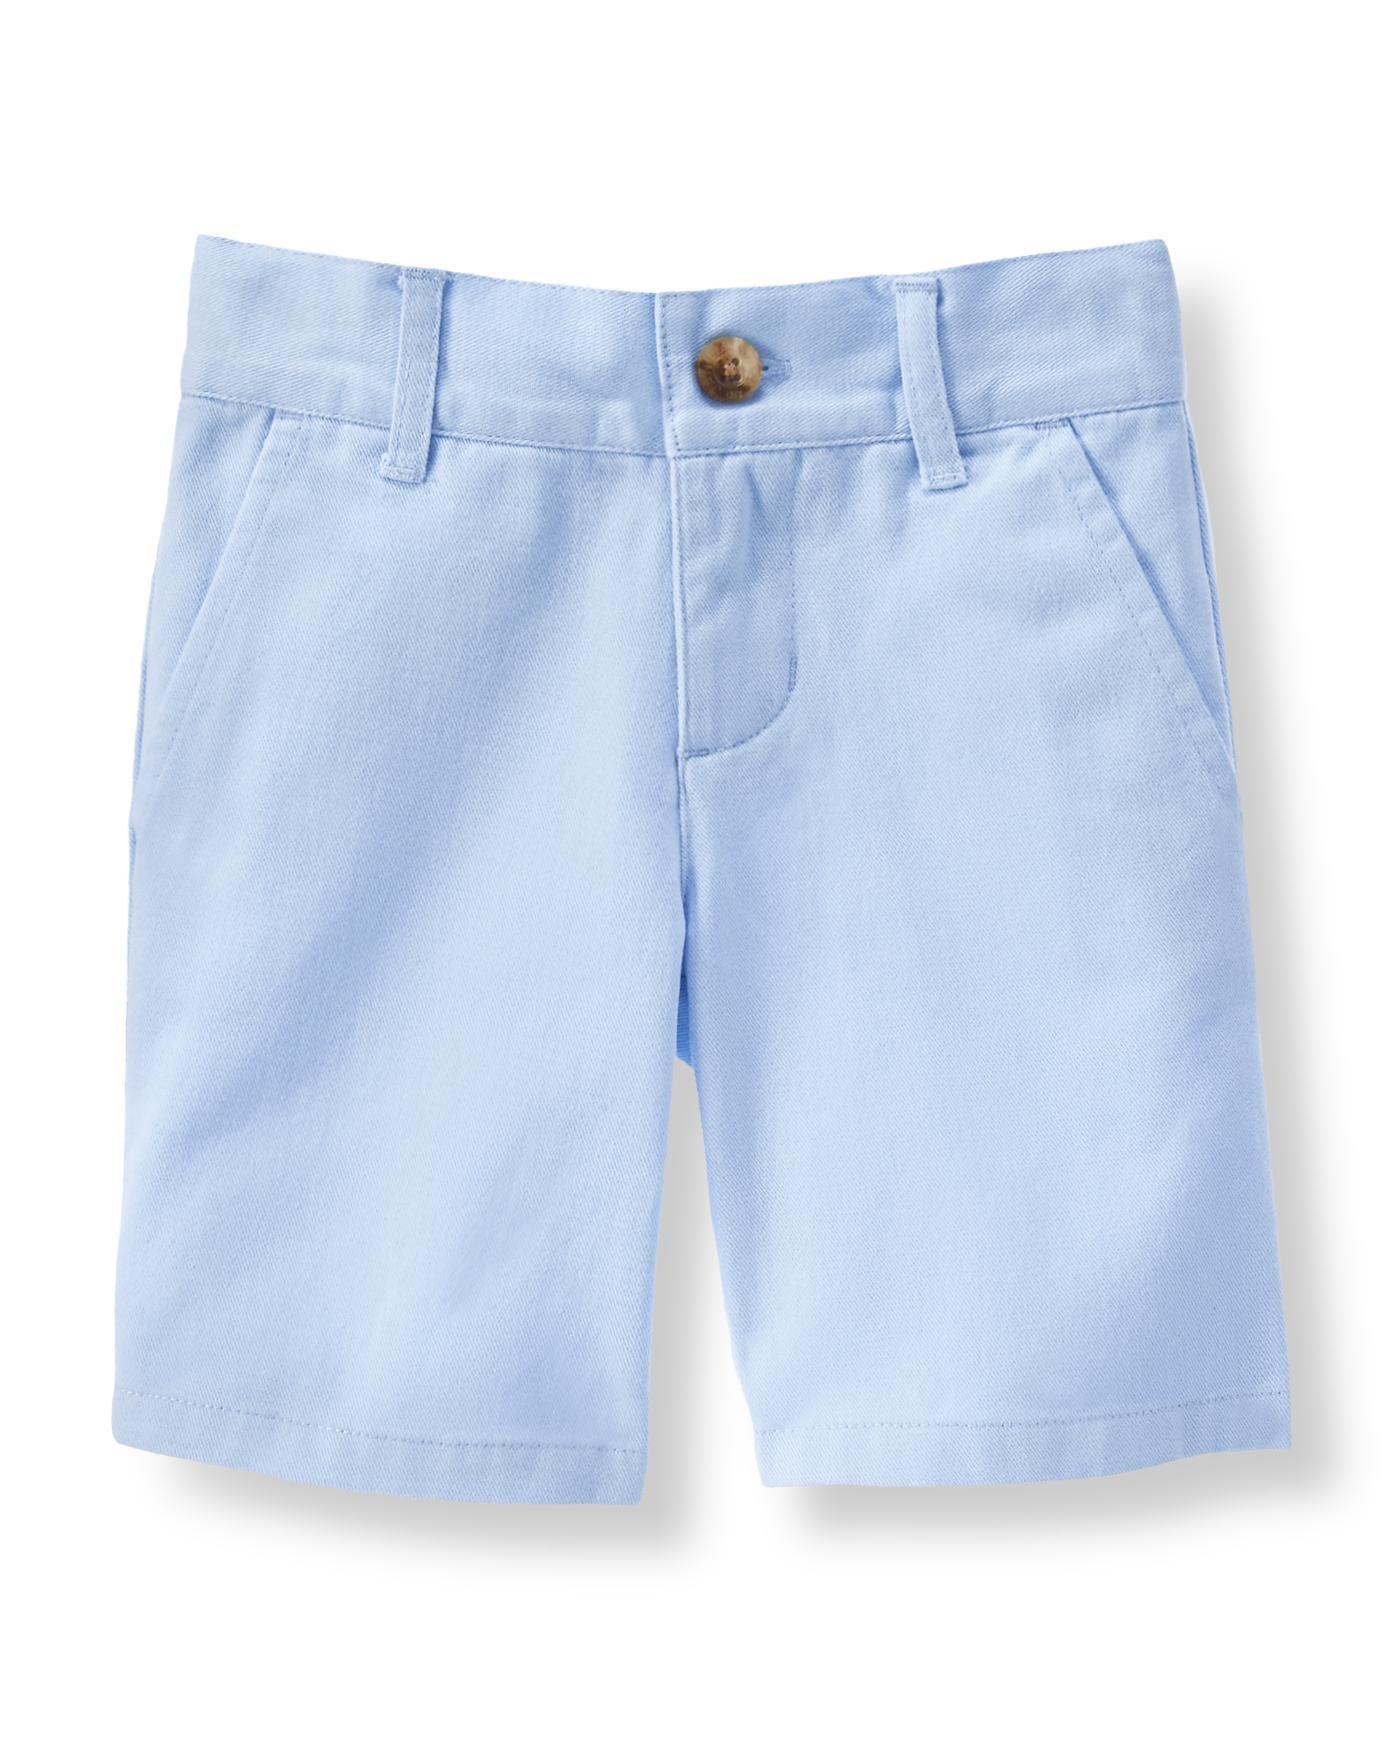 Twill Short image number 0